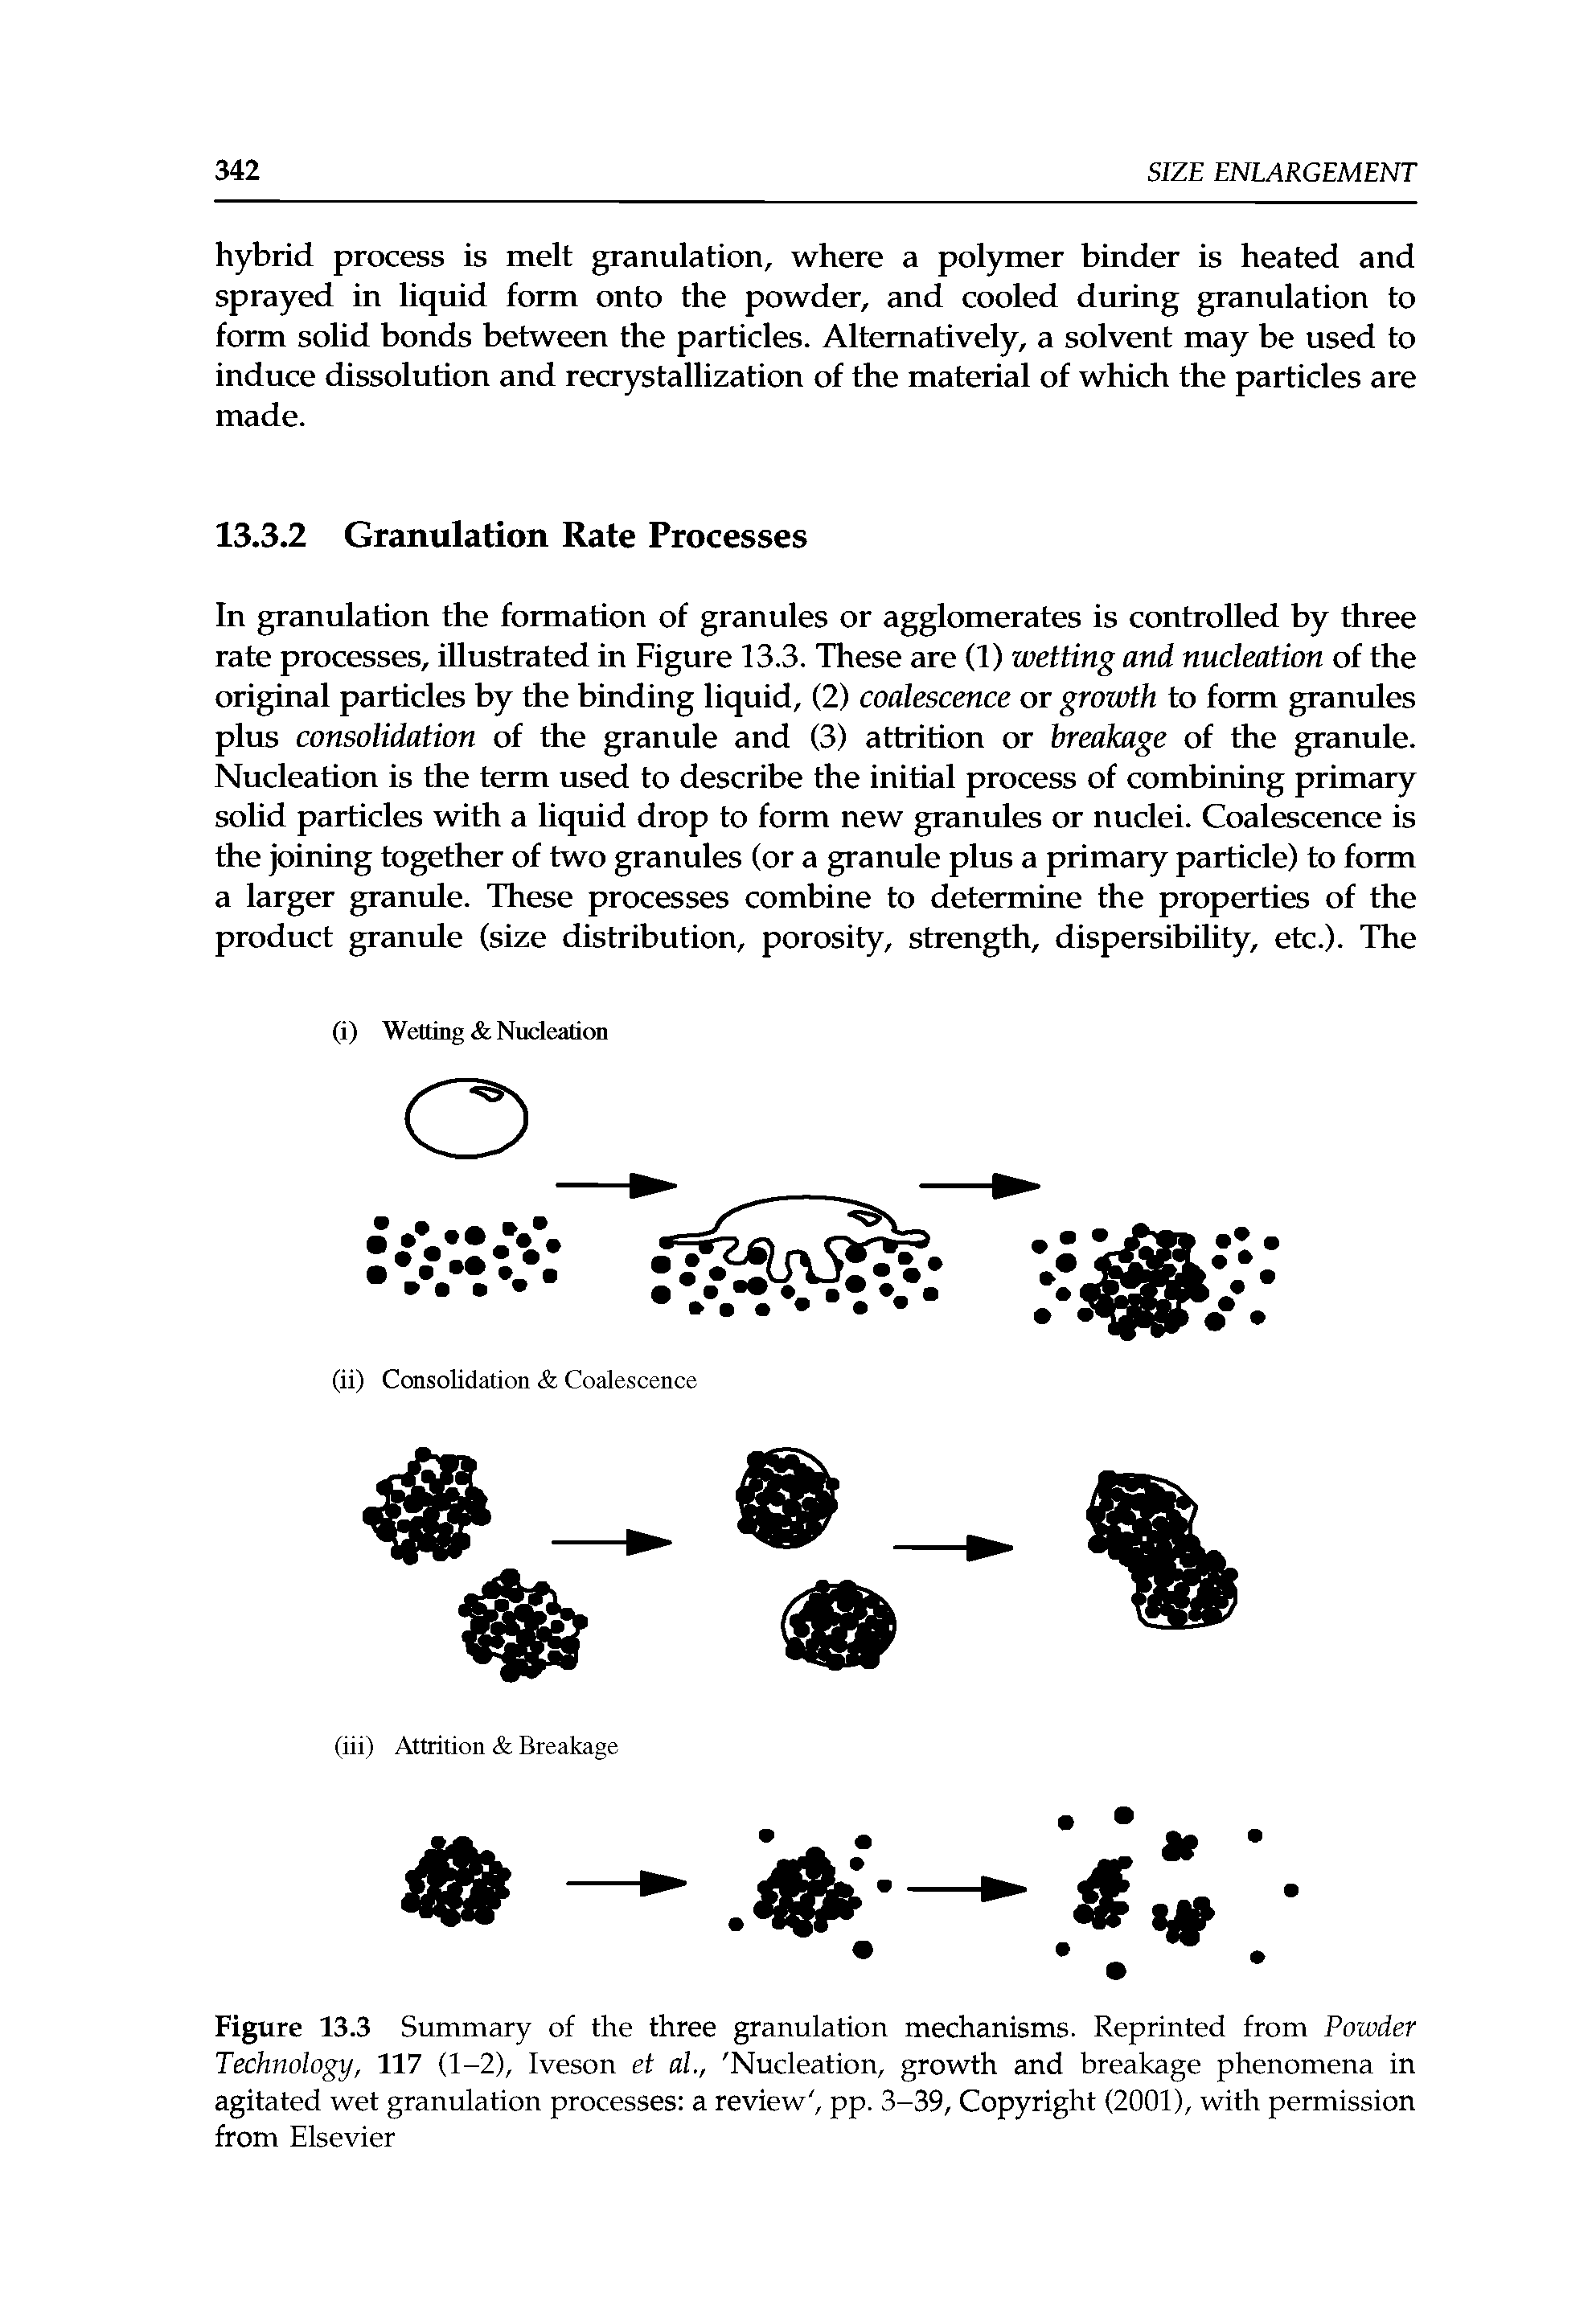 Figure 13.3 Summary of the three granulation mechanisms. Reprinted from Powder Technology, 117 (1-2), Iveson et ah, Nucleation, growth and breakage phenomena in agitated wet granulation processes a review, pp. 3-39, Copyright (2001), with permission from Elsevier...